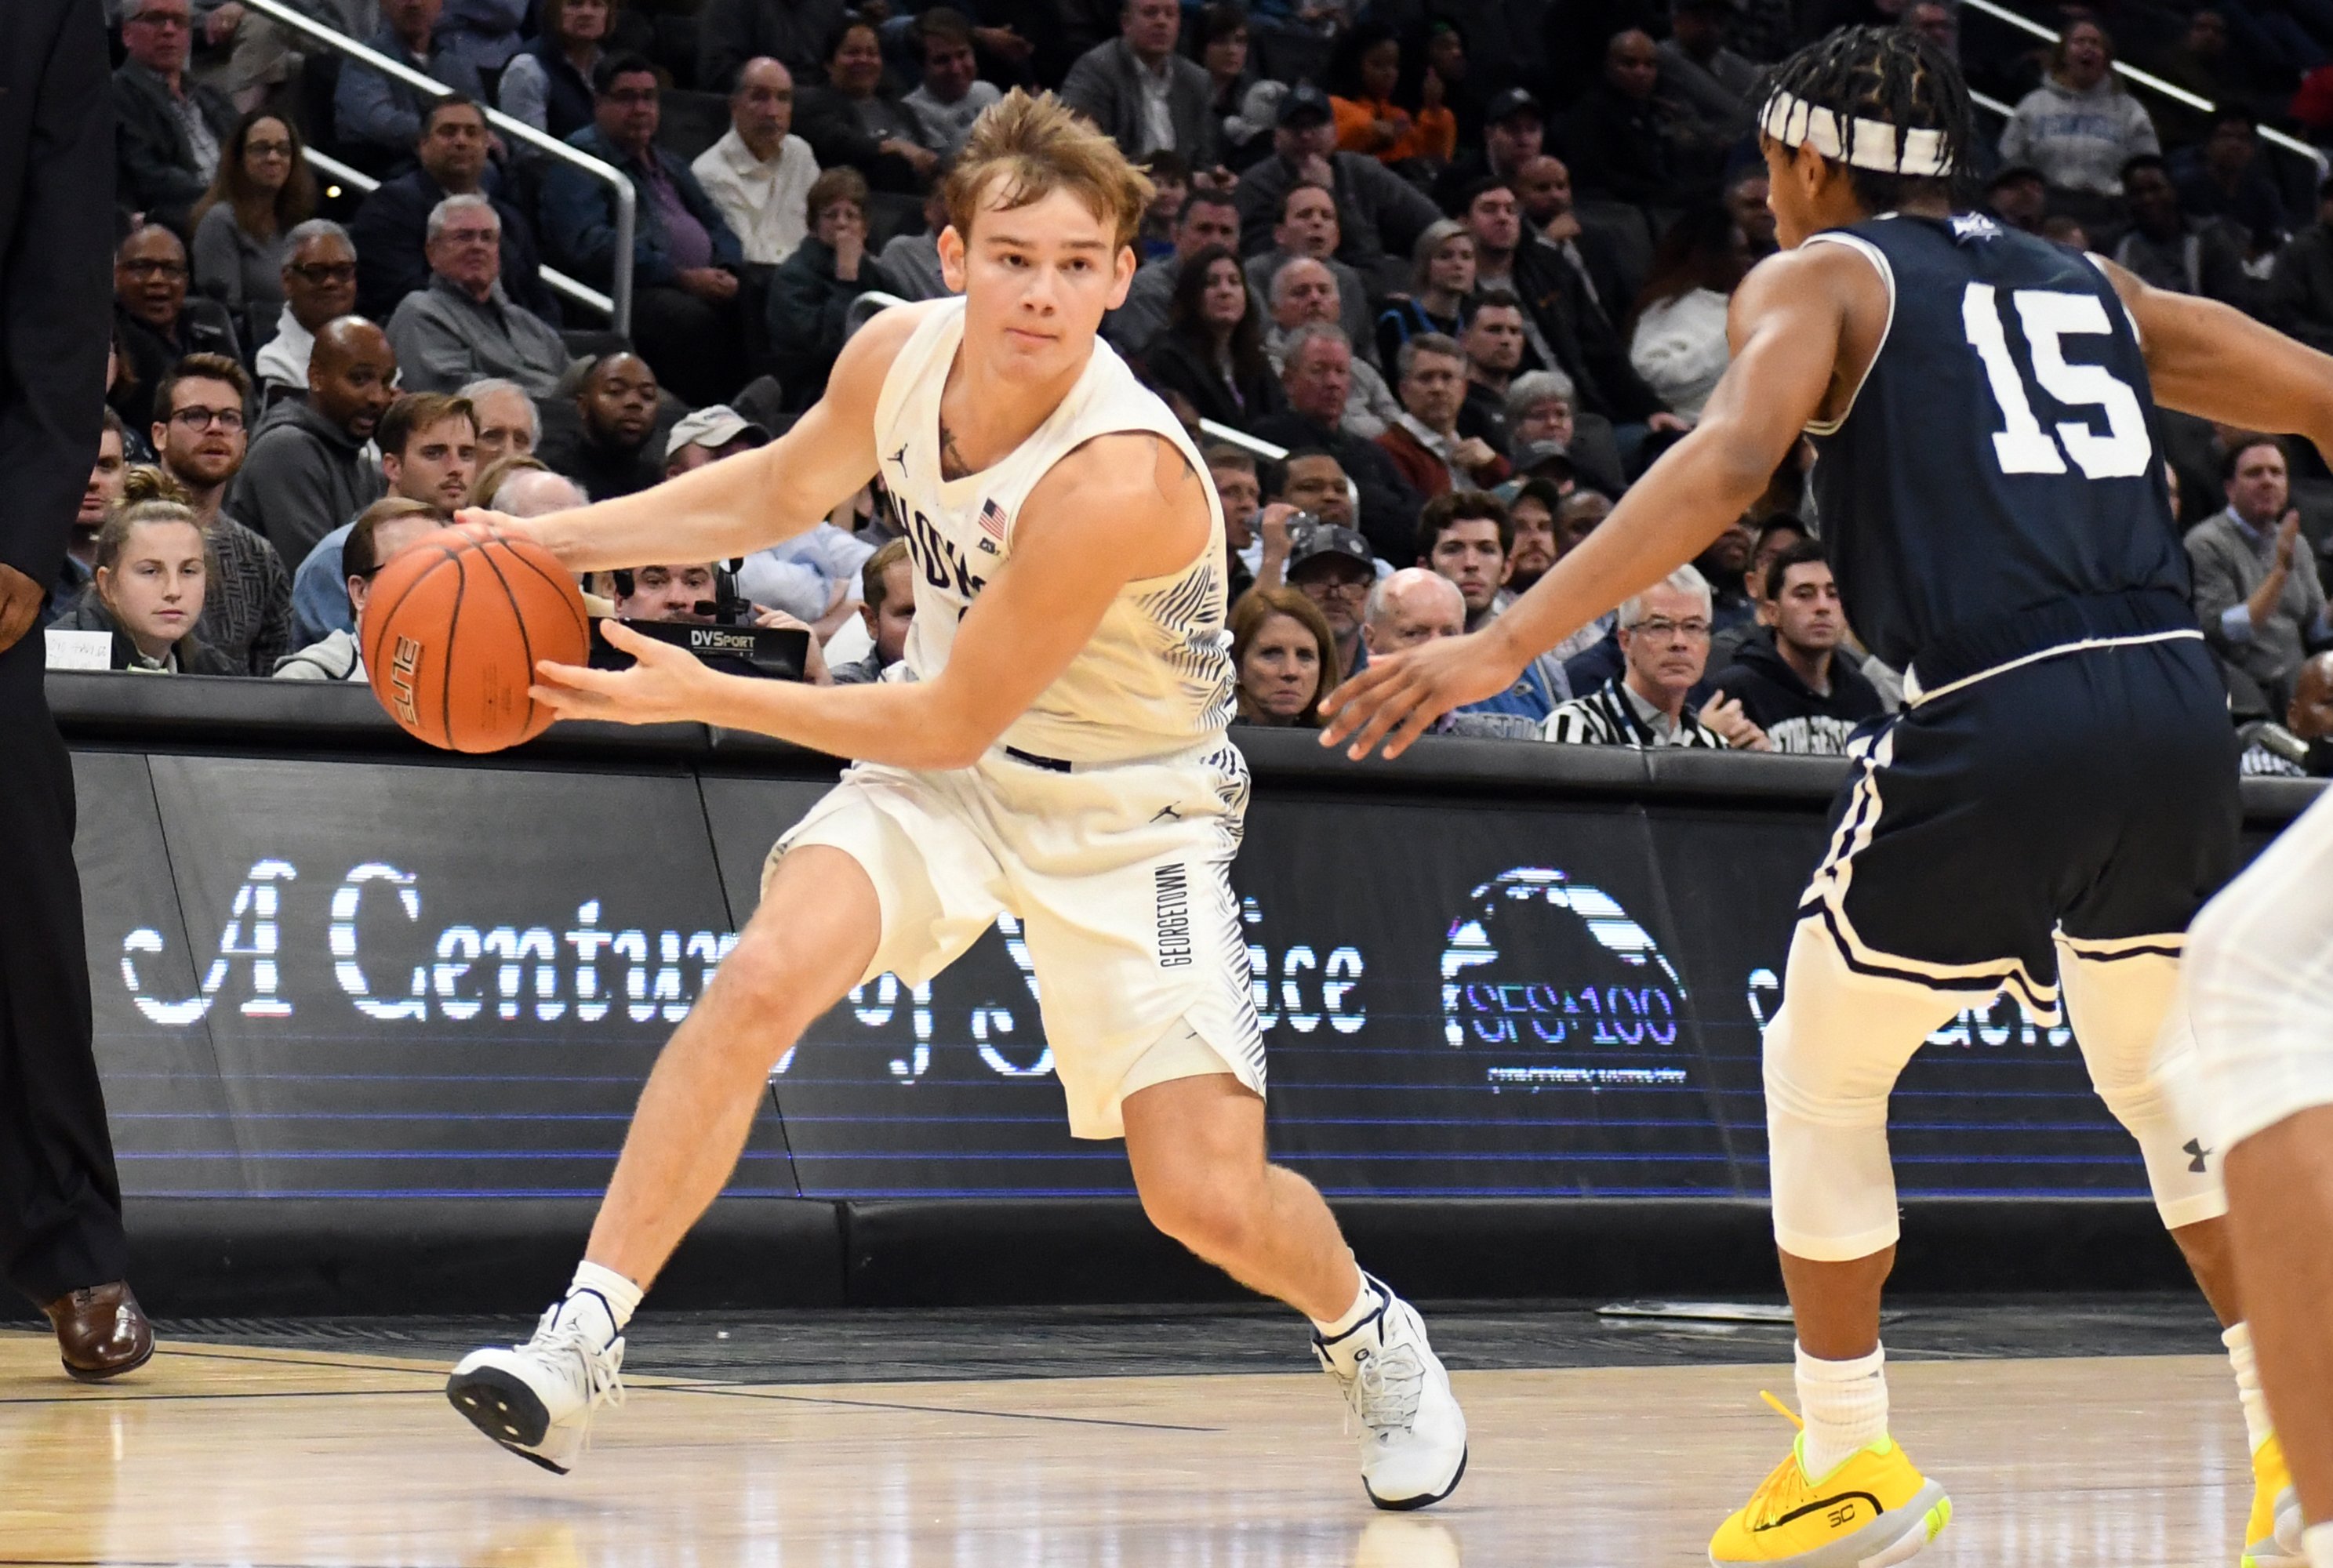 Mac McClung has dunked past Iverson, and will follow him to Georgetown